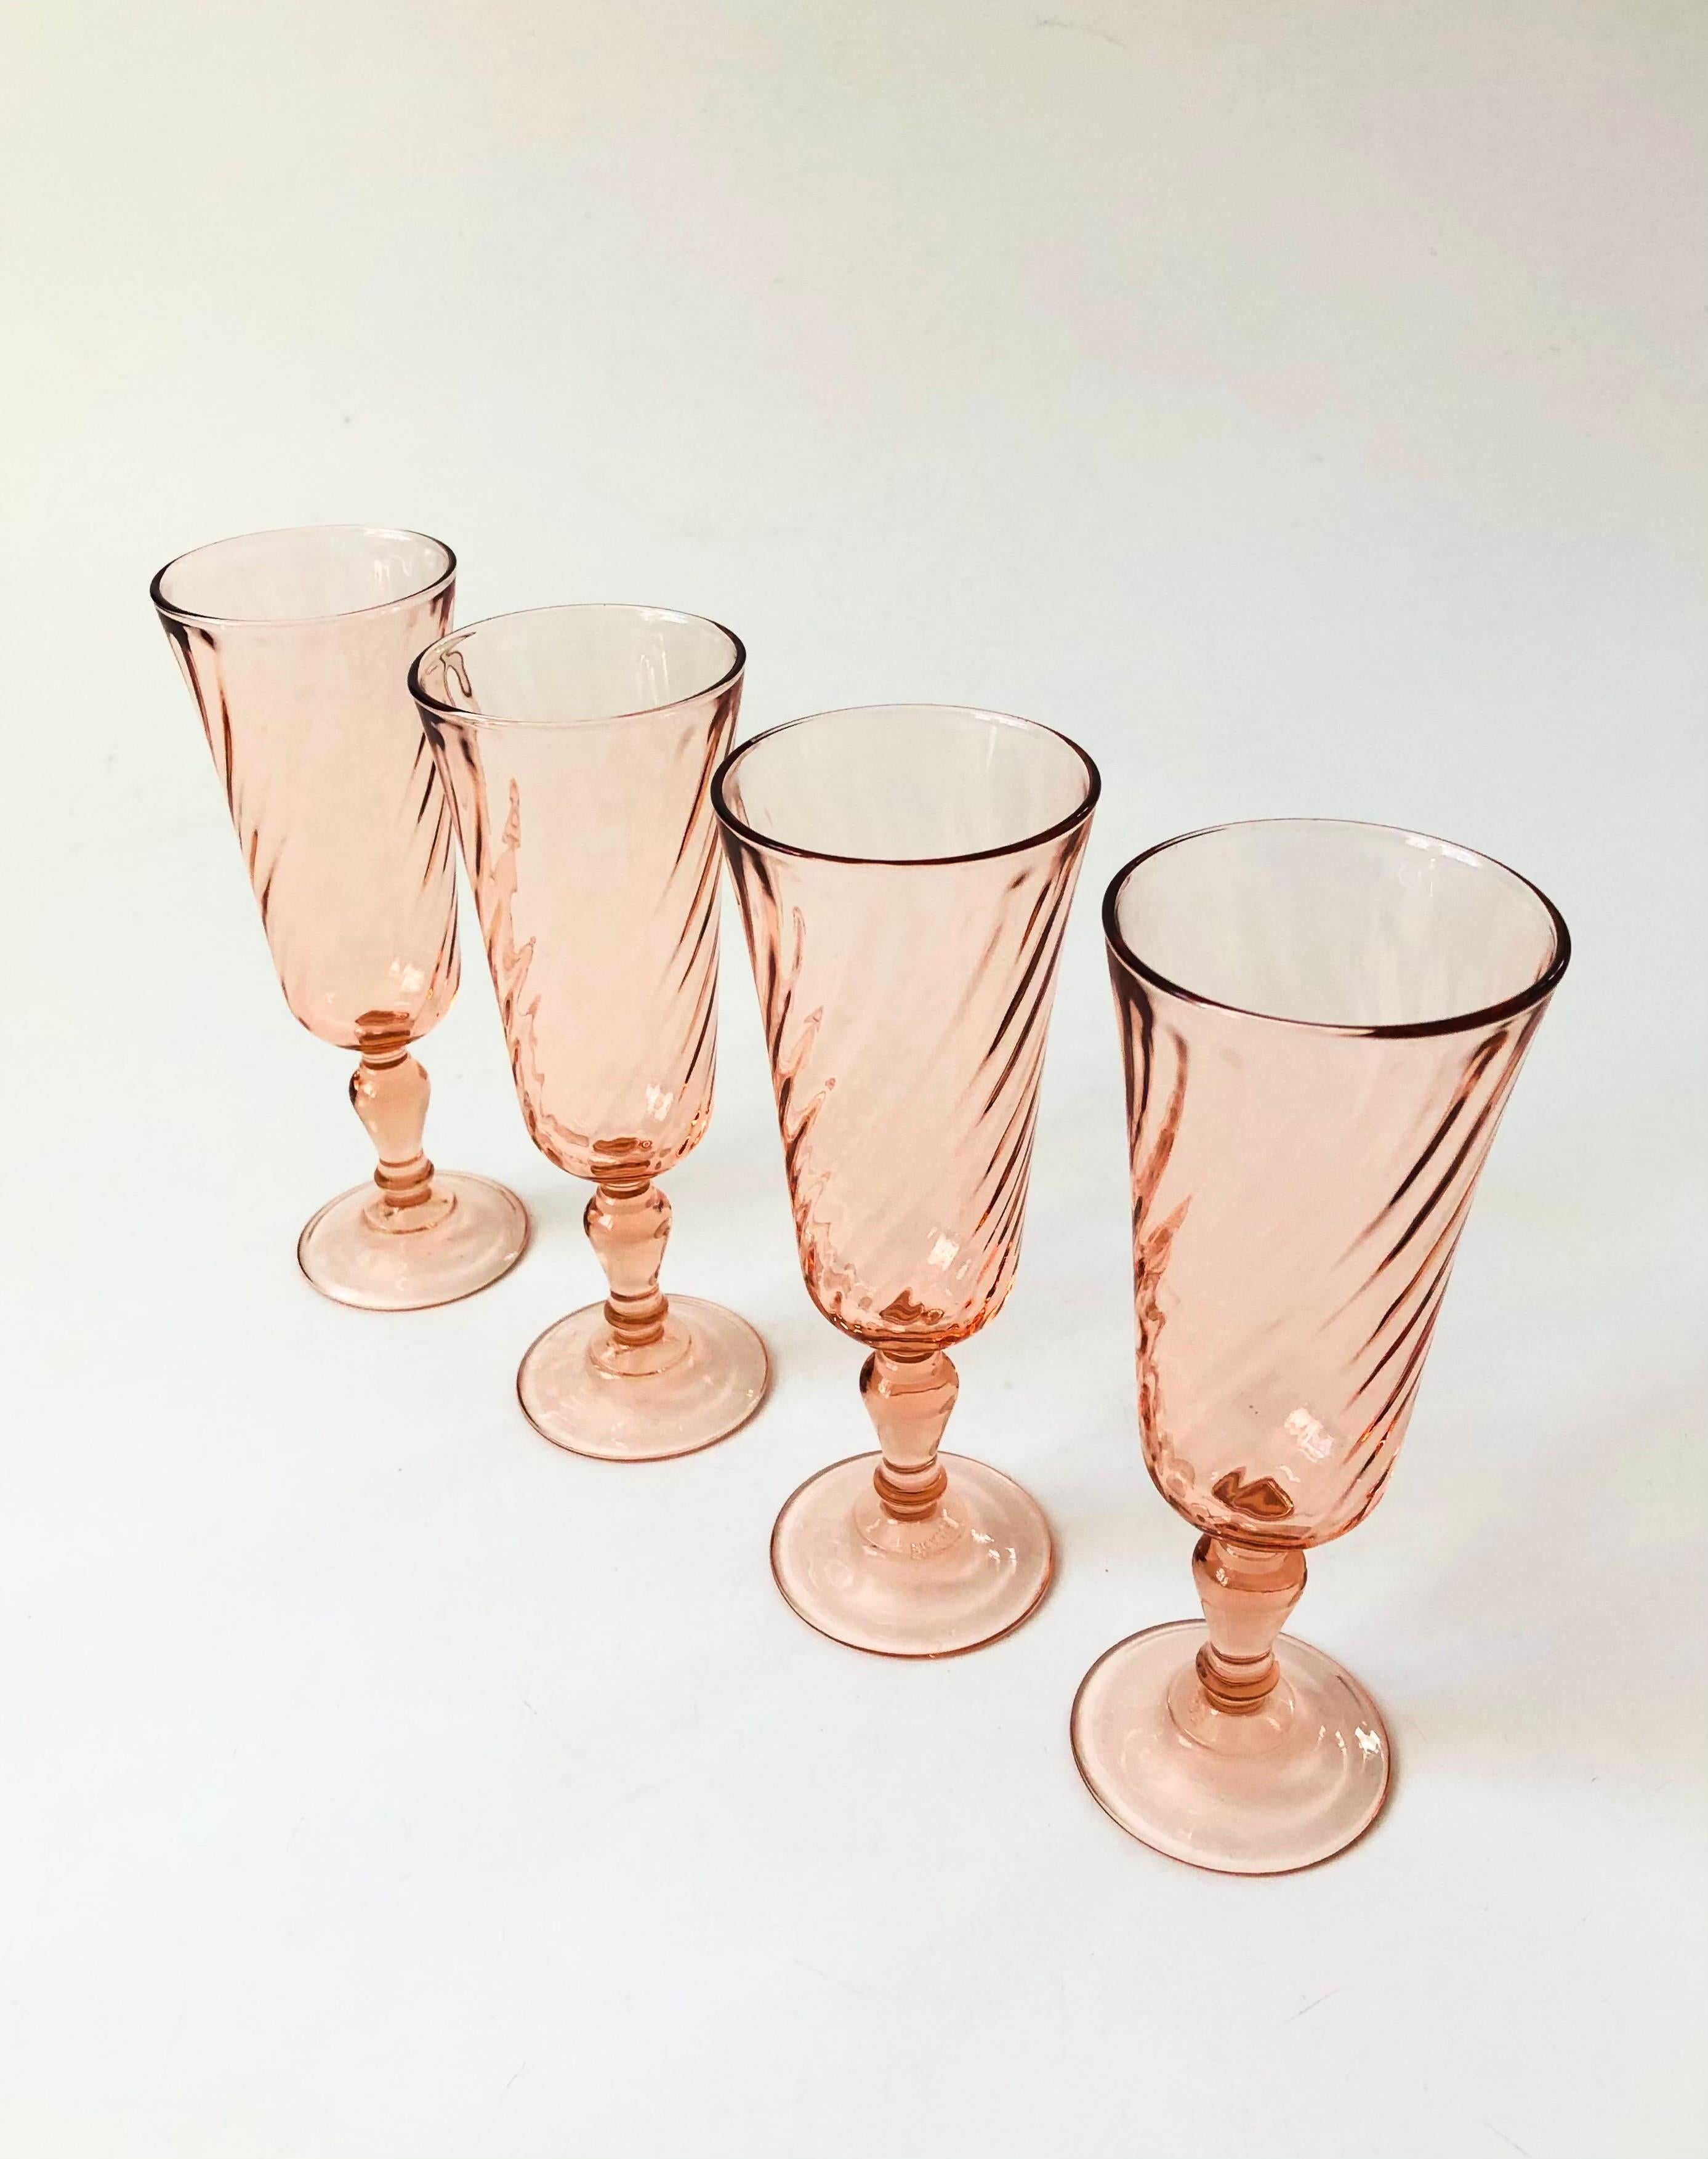 A set of 4 vintage champagne flutes in a pale blush pink hue. Each glass has a lovely swirl design. Made in France by Arcoroc.

